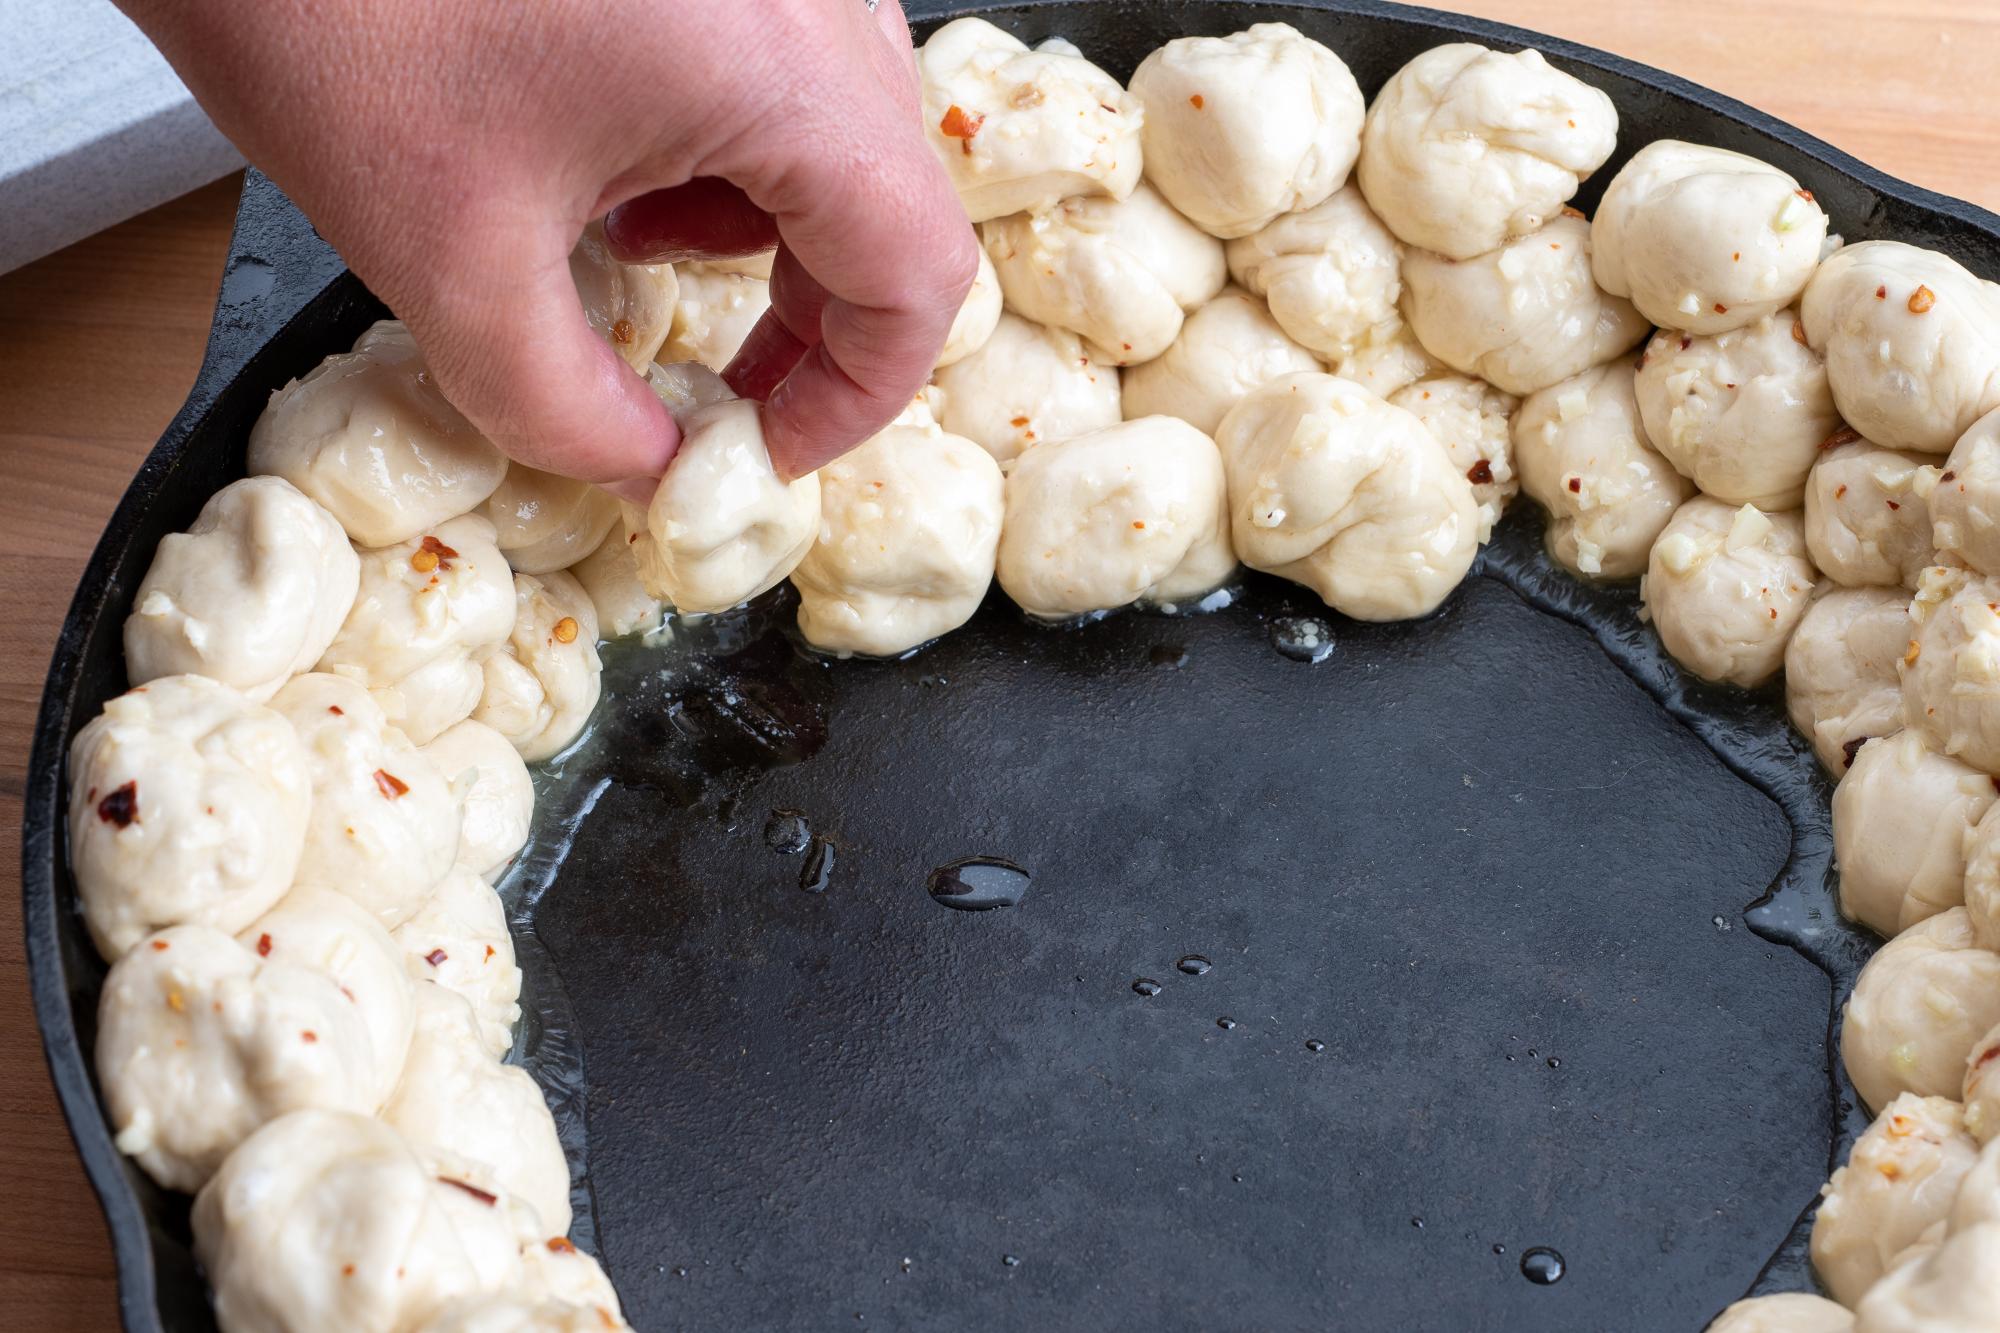 Placing the dough balls in the skillet.